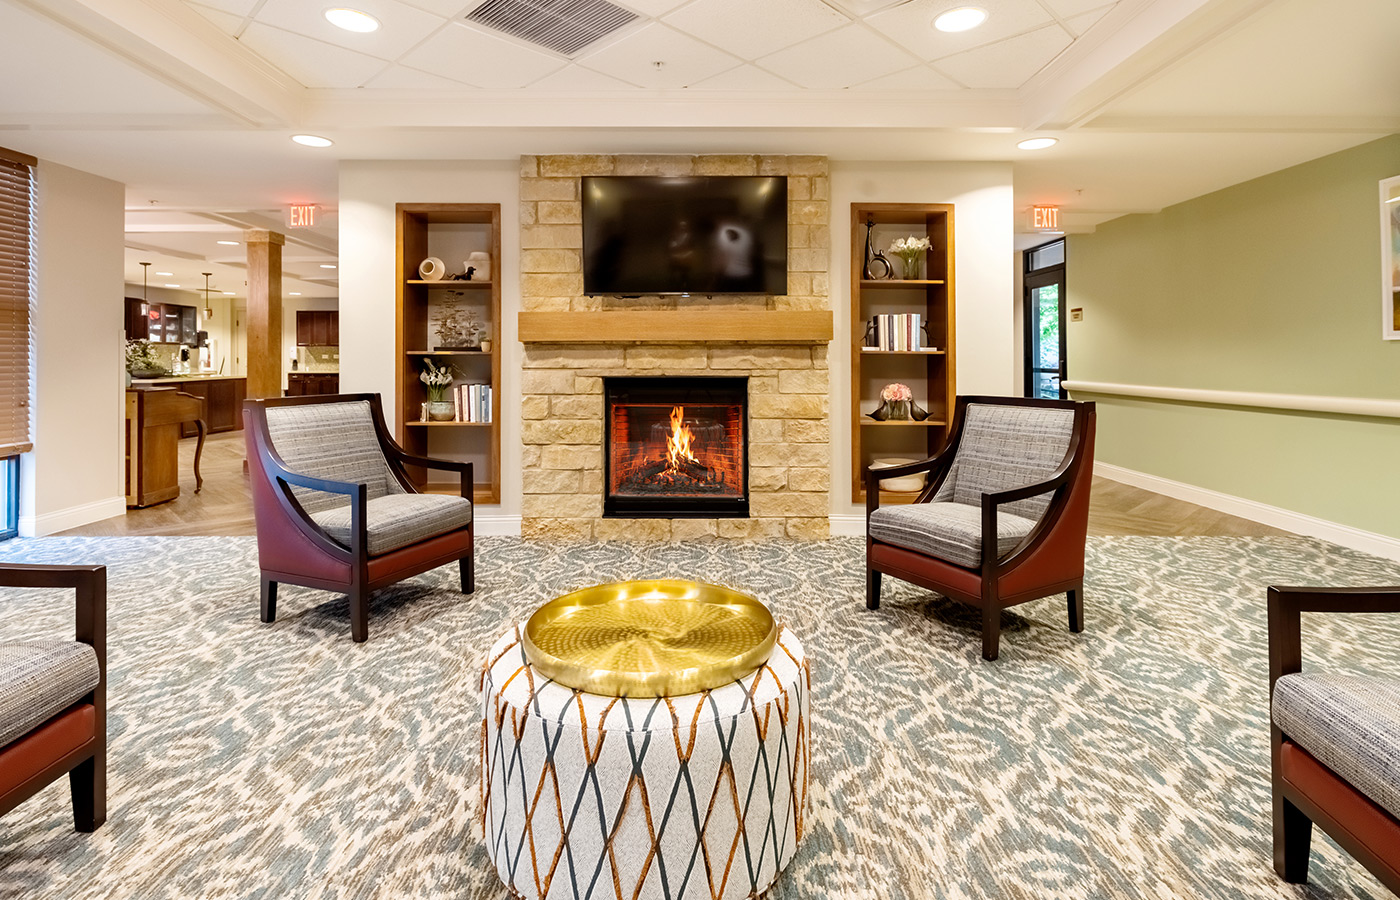 A lounge with seating and a fireplace.